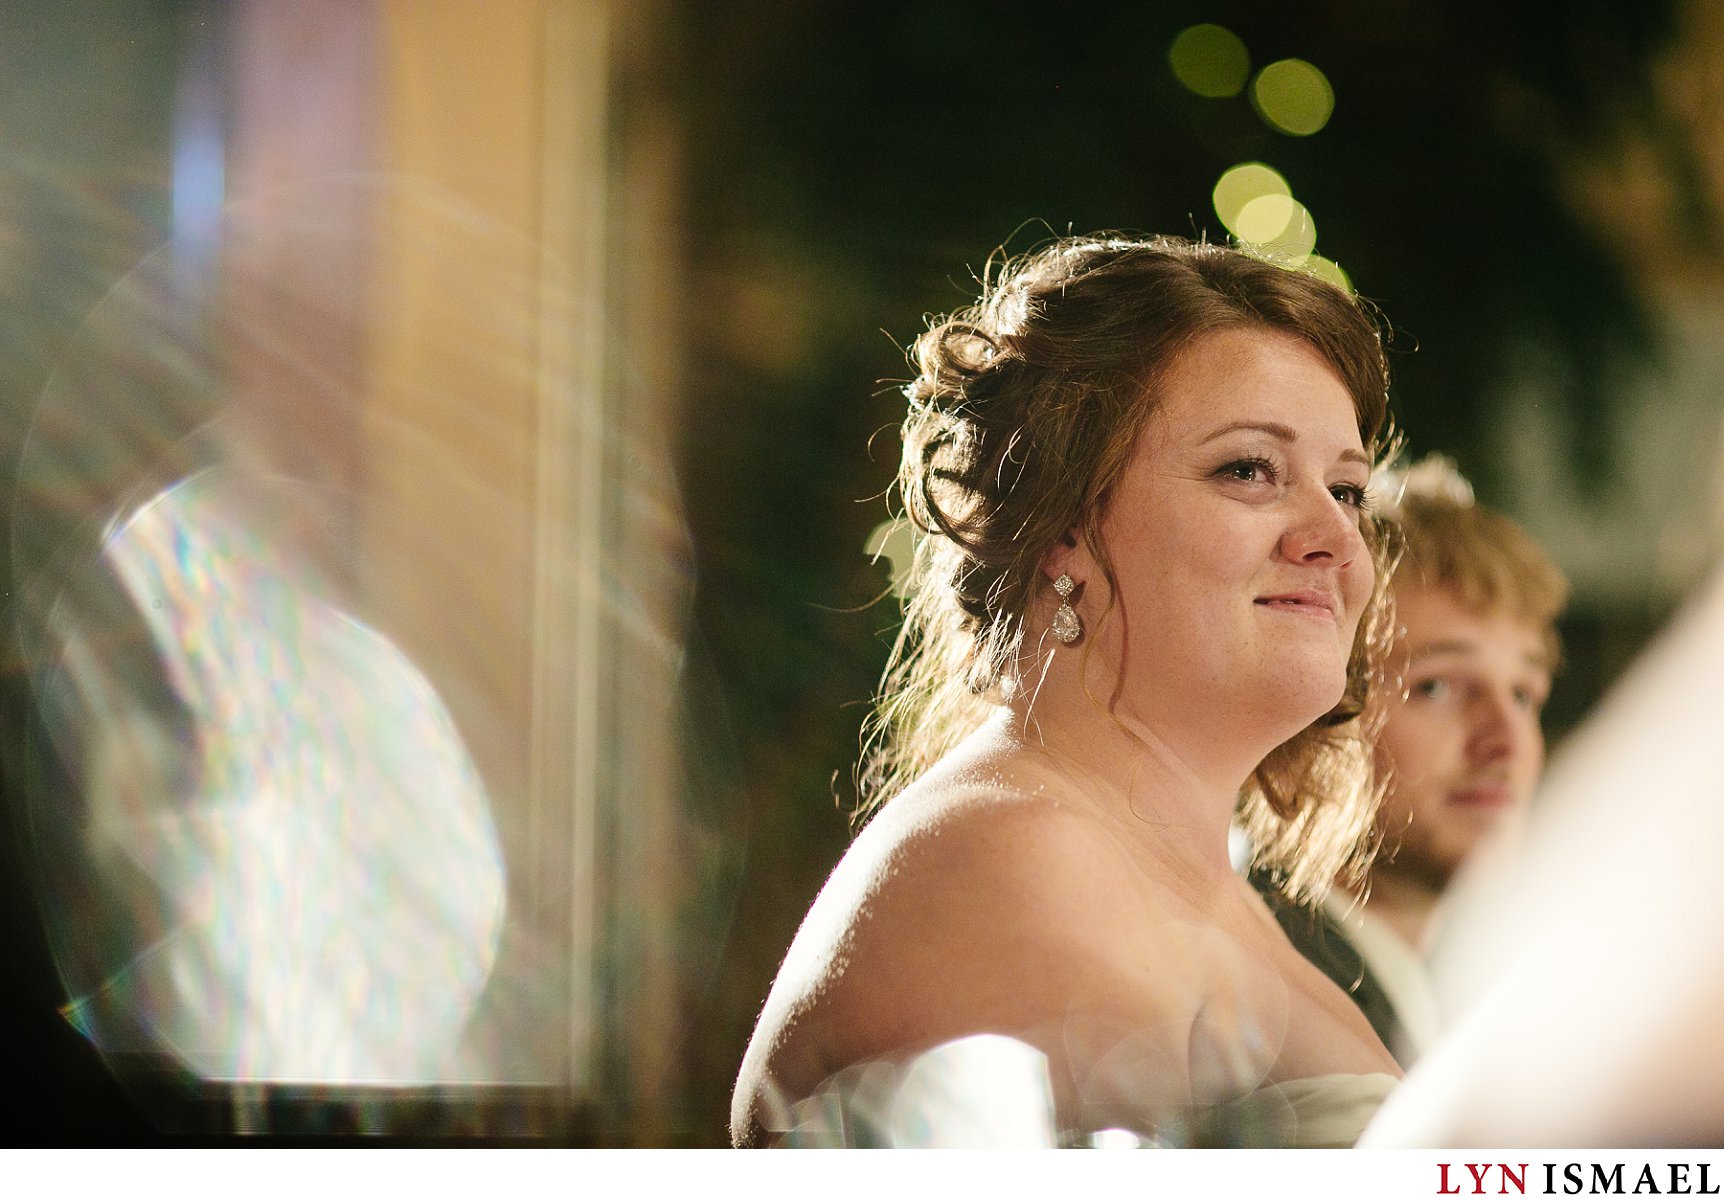 An emotional moment captured of the bride listening to her parent's speech.